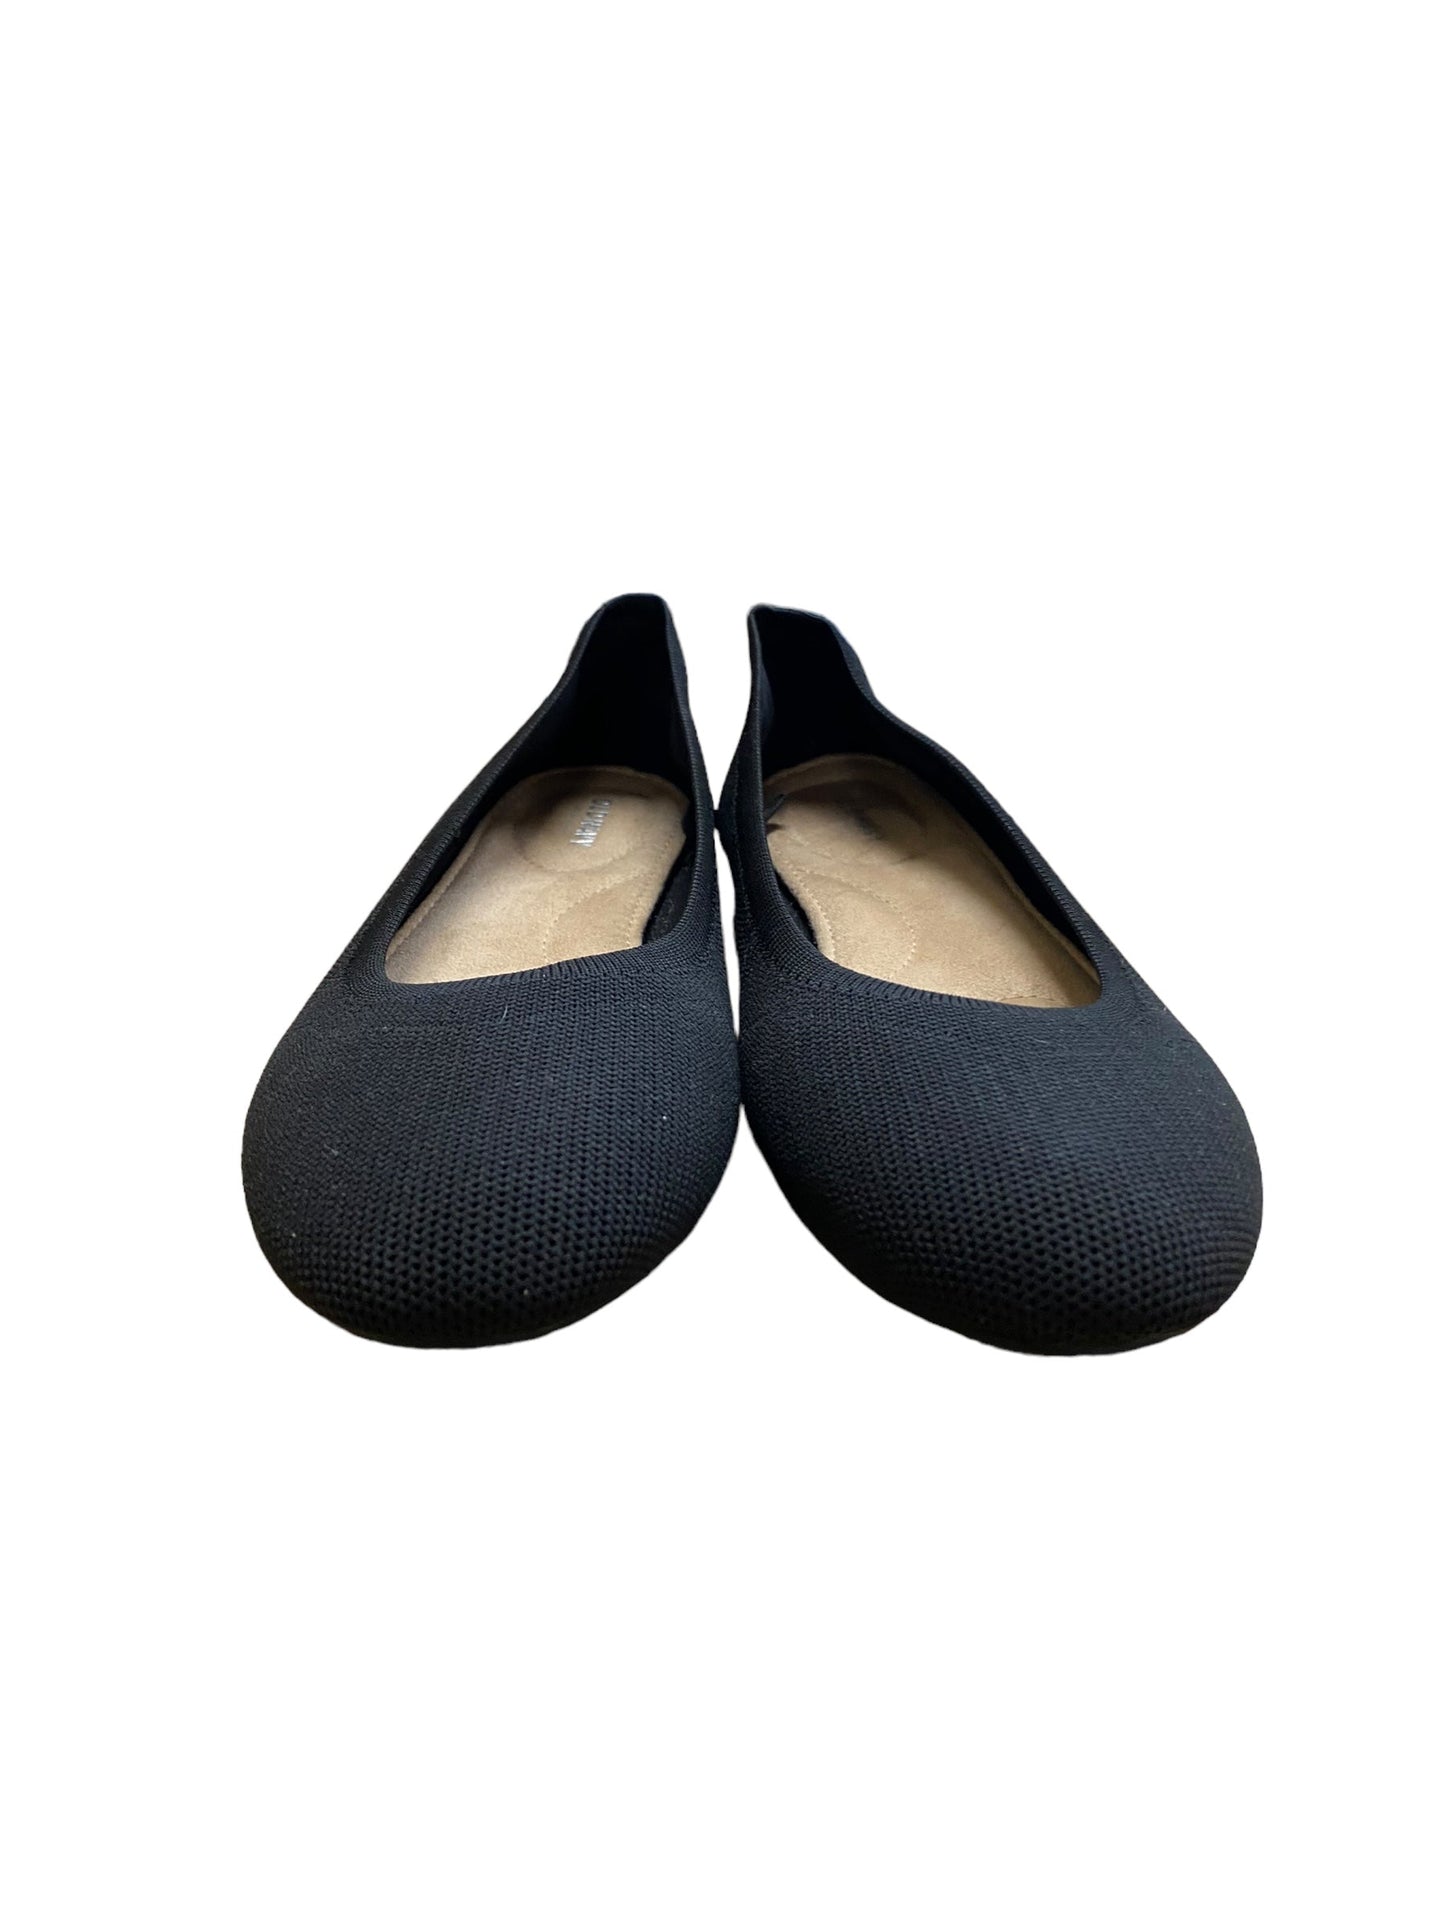 Shoes Flats By Old Navy  Size: 9.5